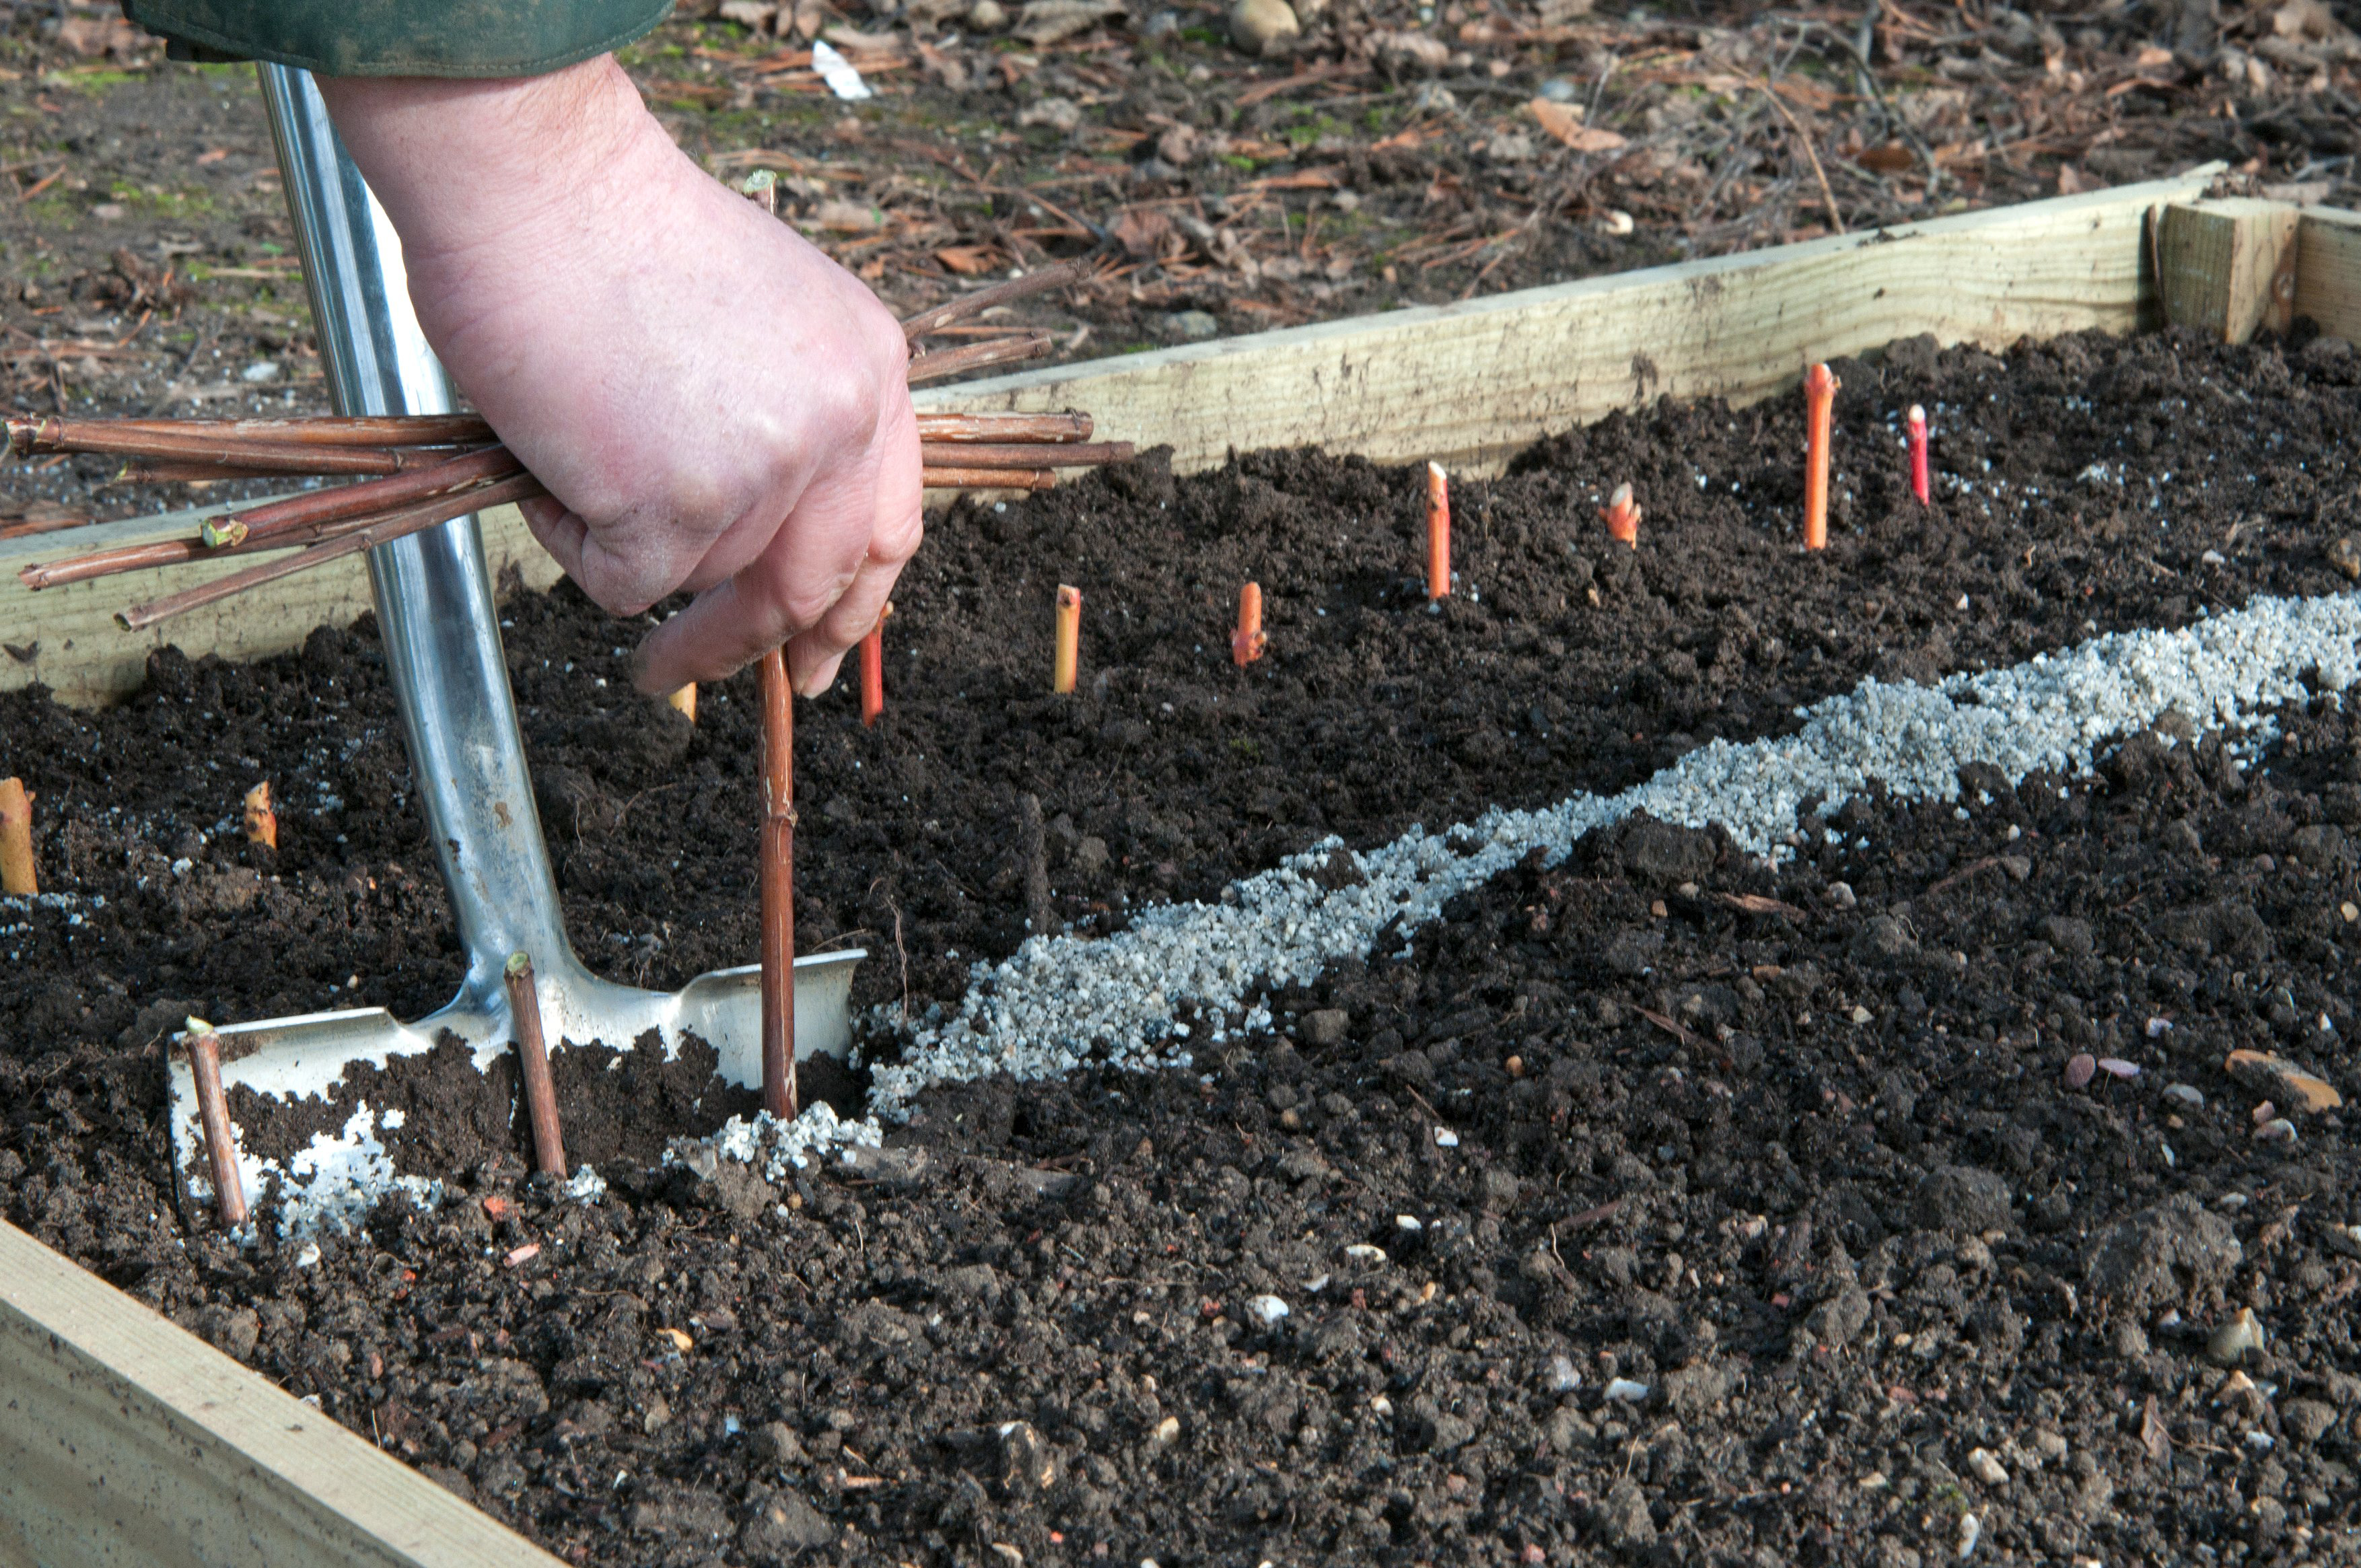 Place trimmed cuttings into a raised bed using a spade to make a slit trench. (Tim Sandall/RHS/PA)